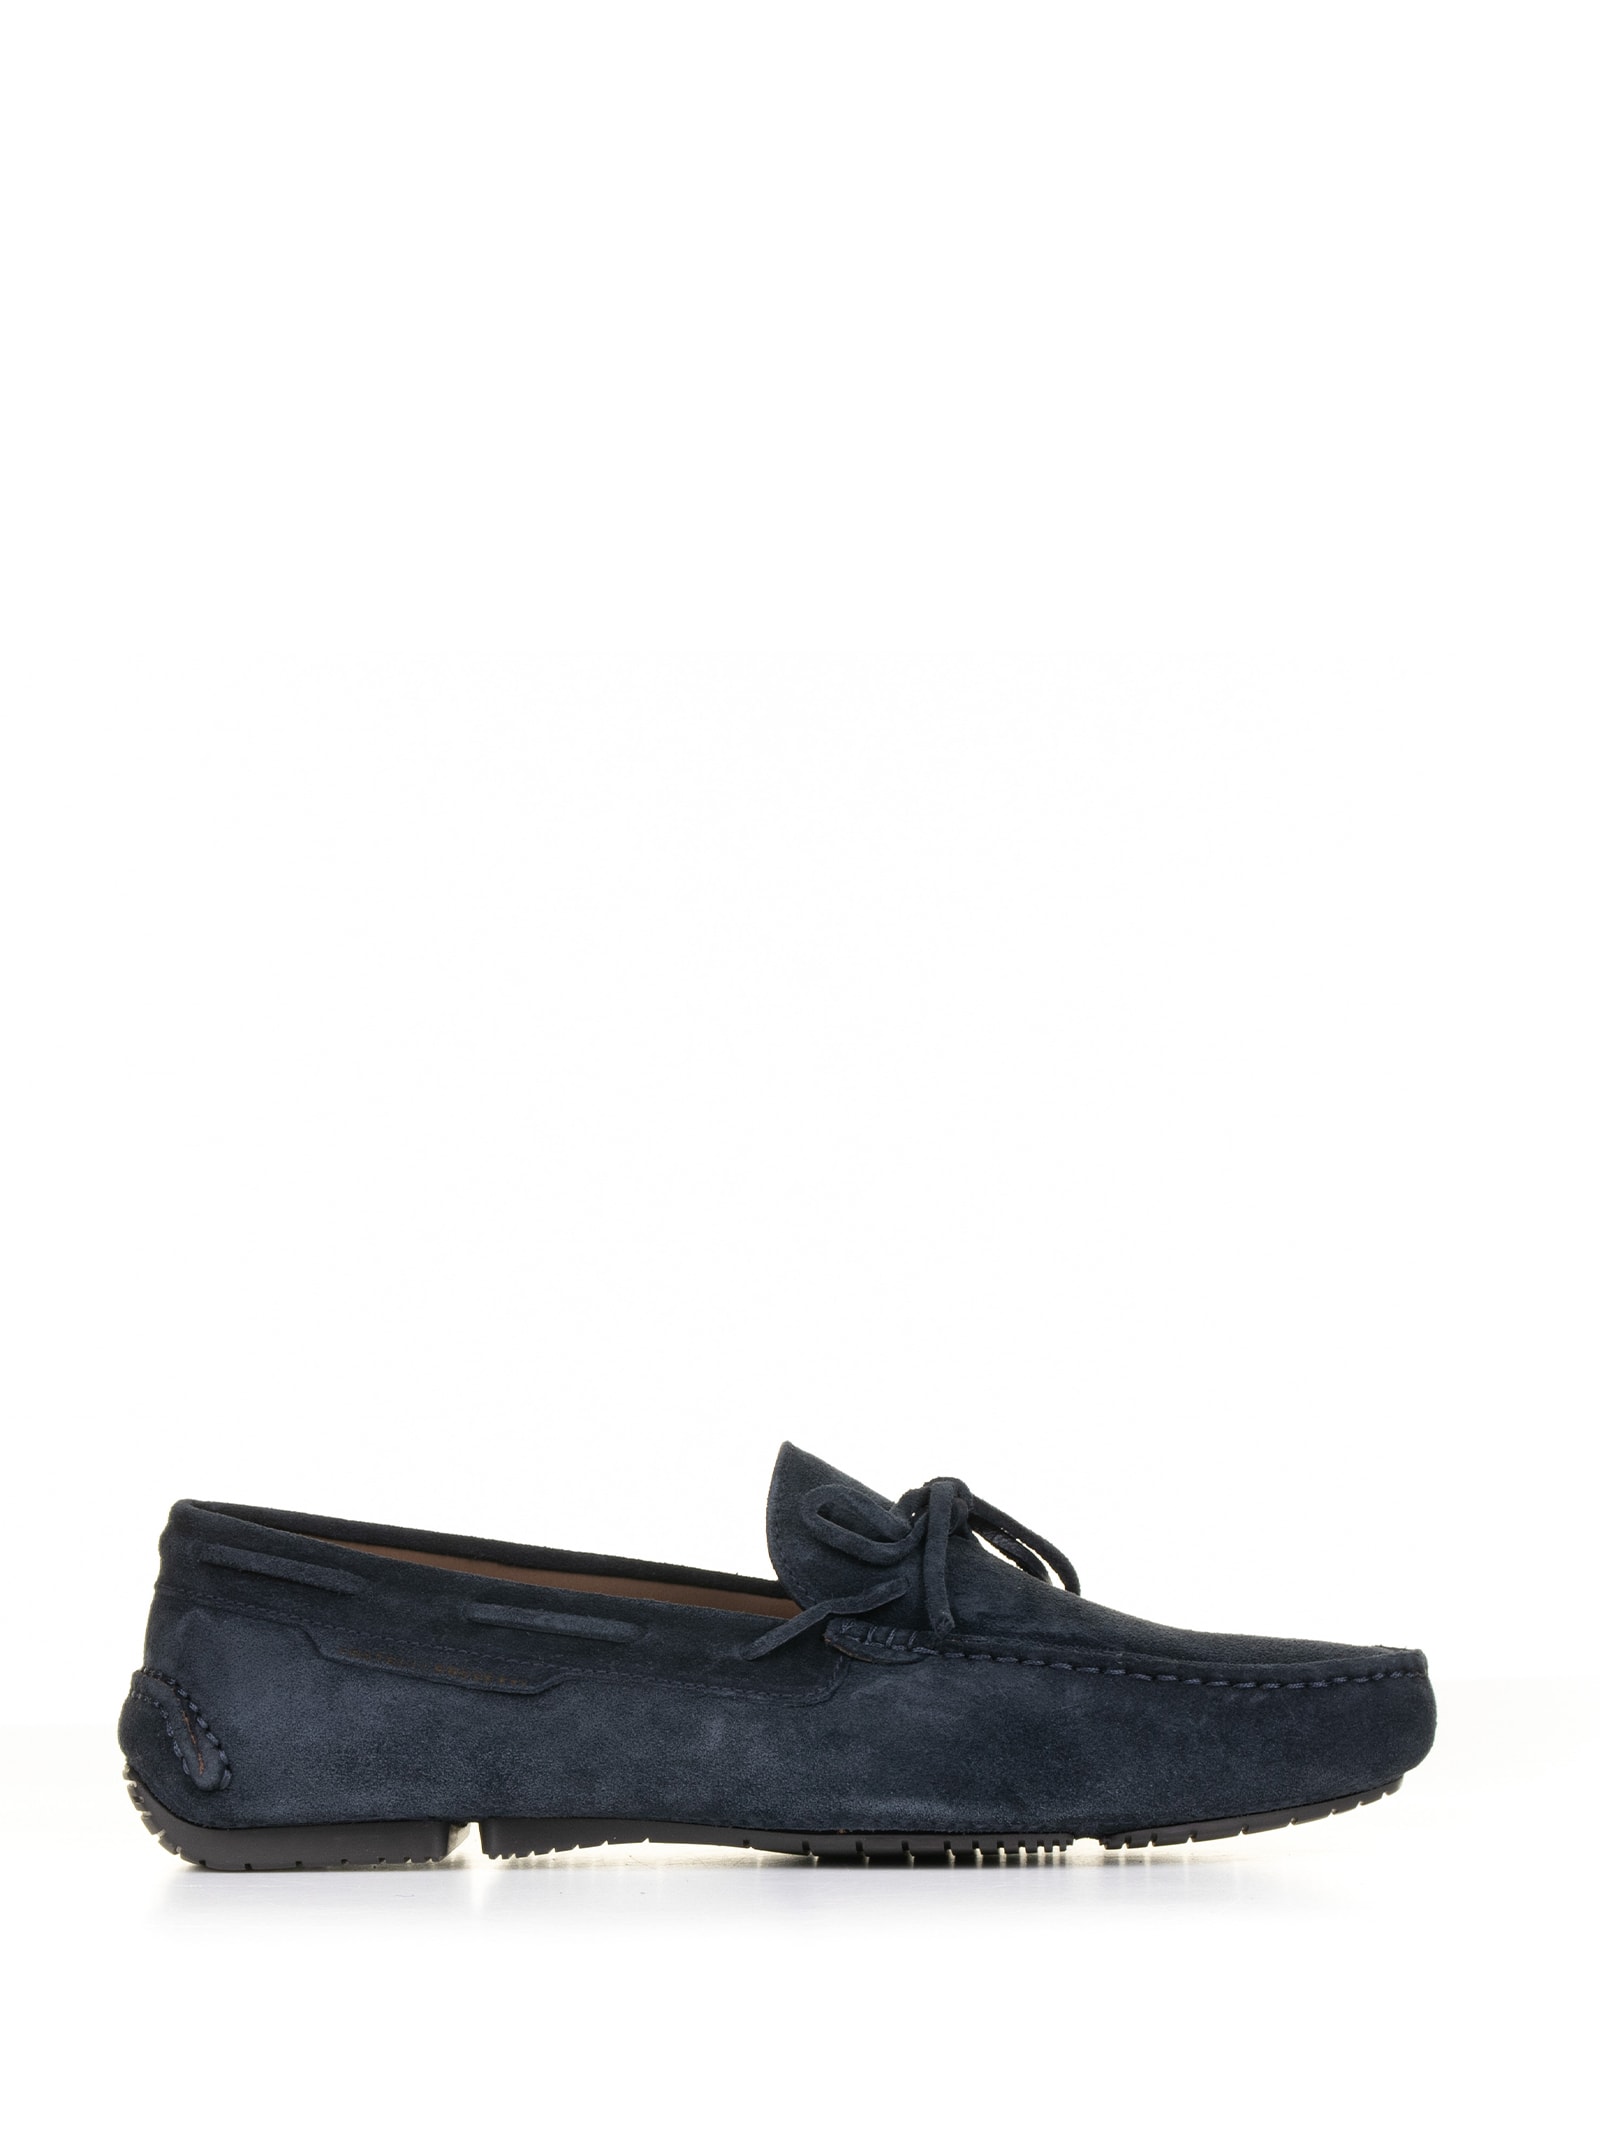 Moccasin In Navy Blue Suede